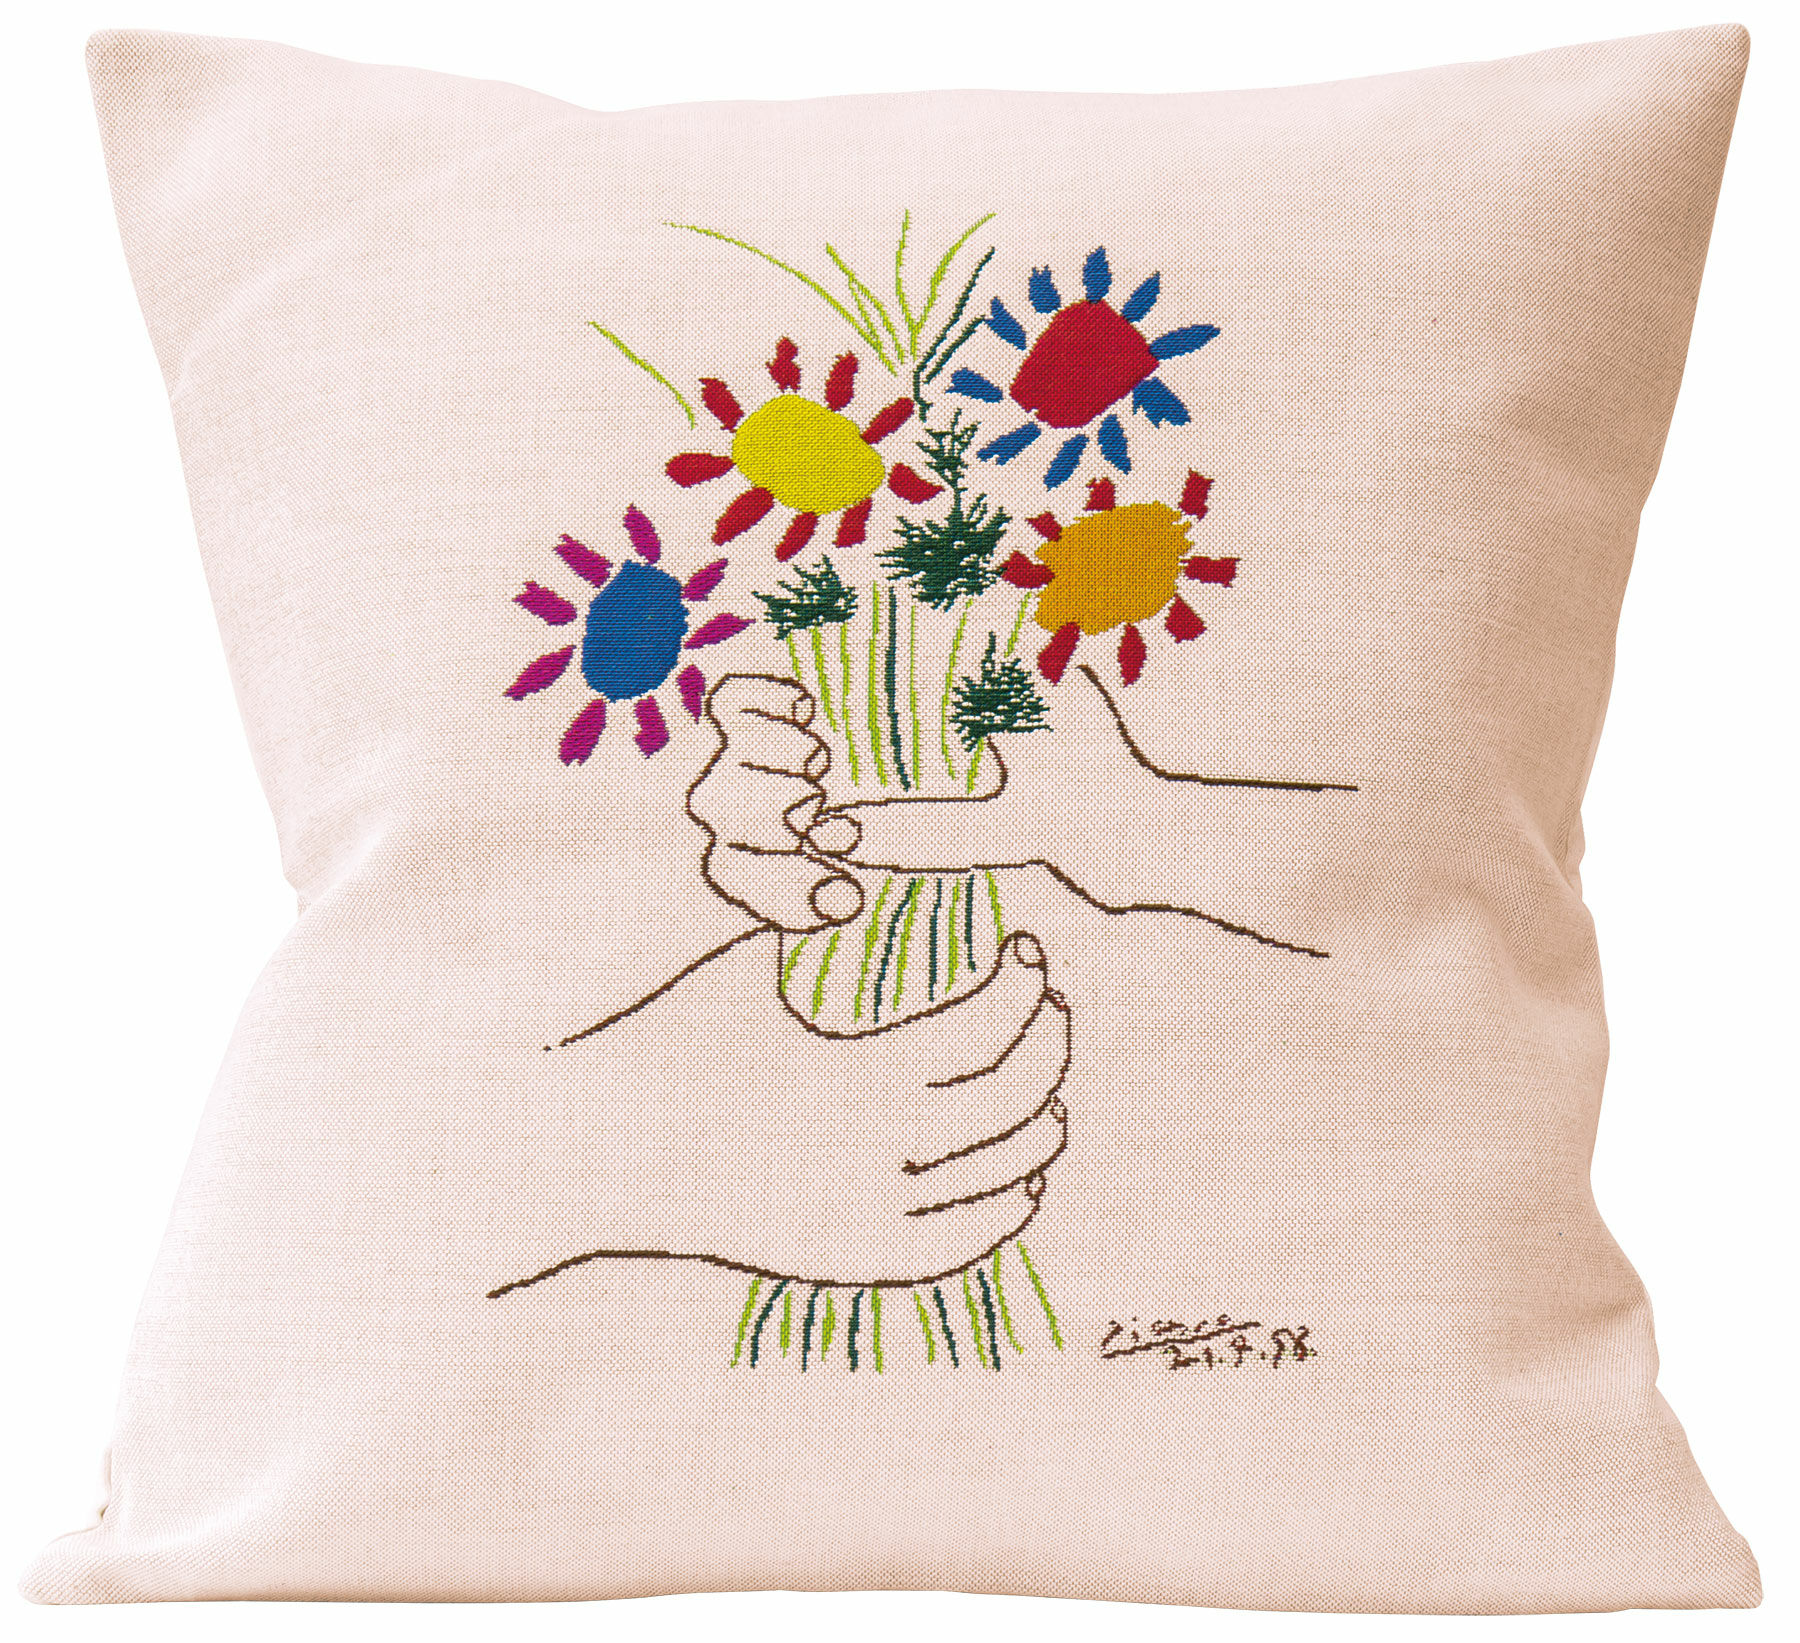 Cushion cover "Hands with Bouquet of Flowers" by Pablo Picasso